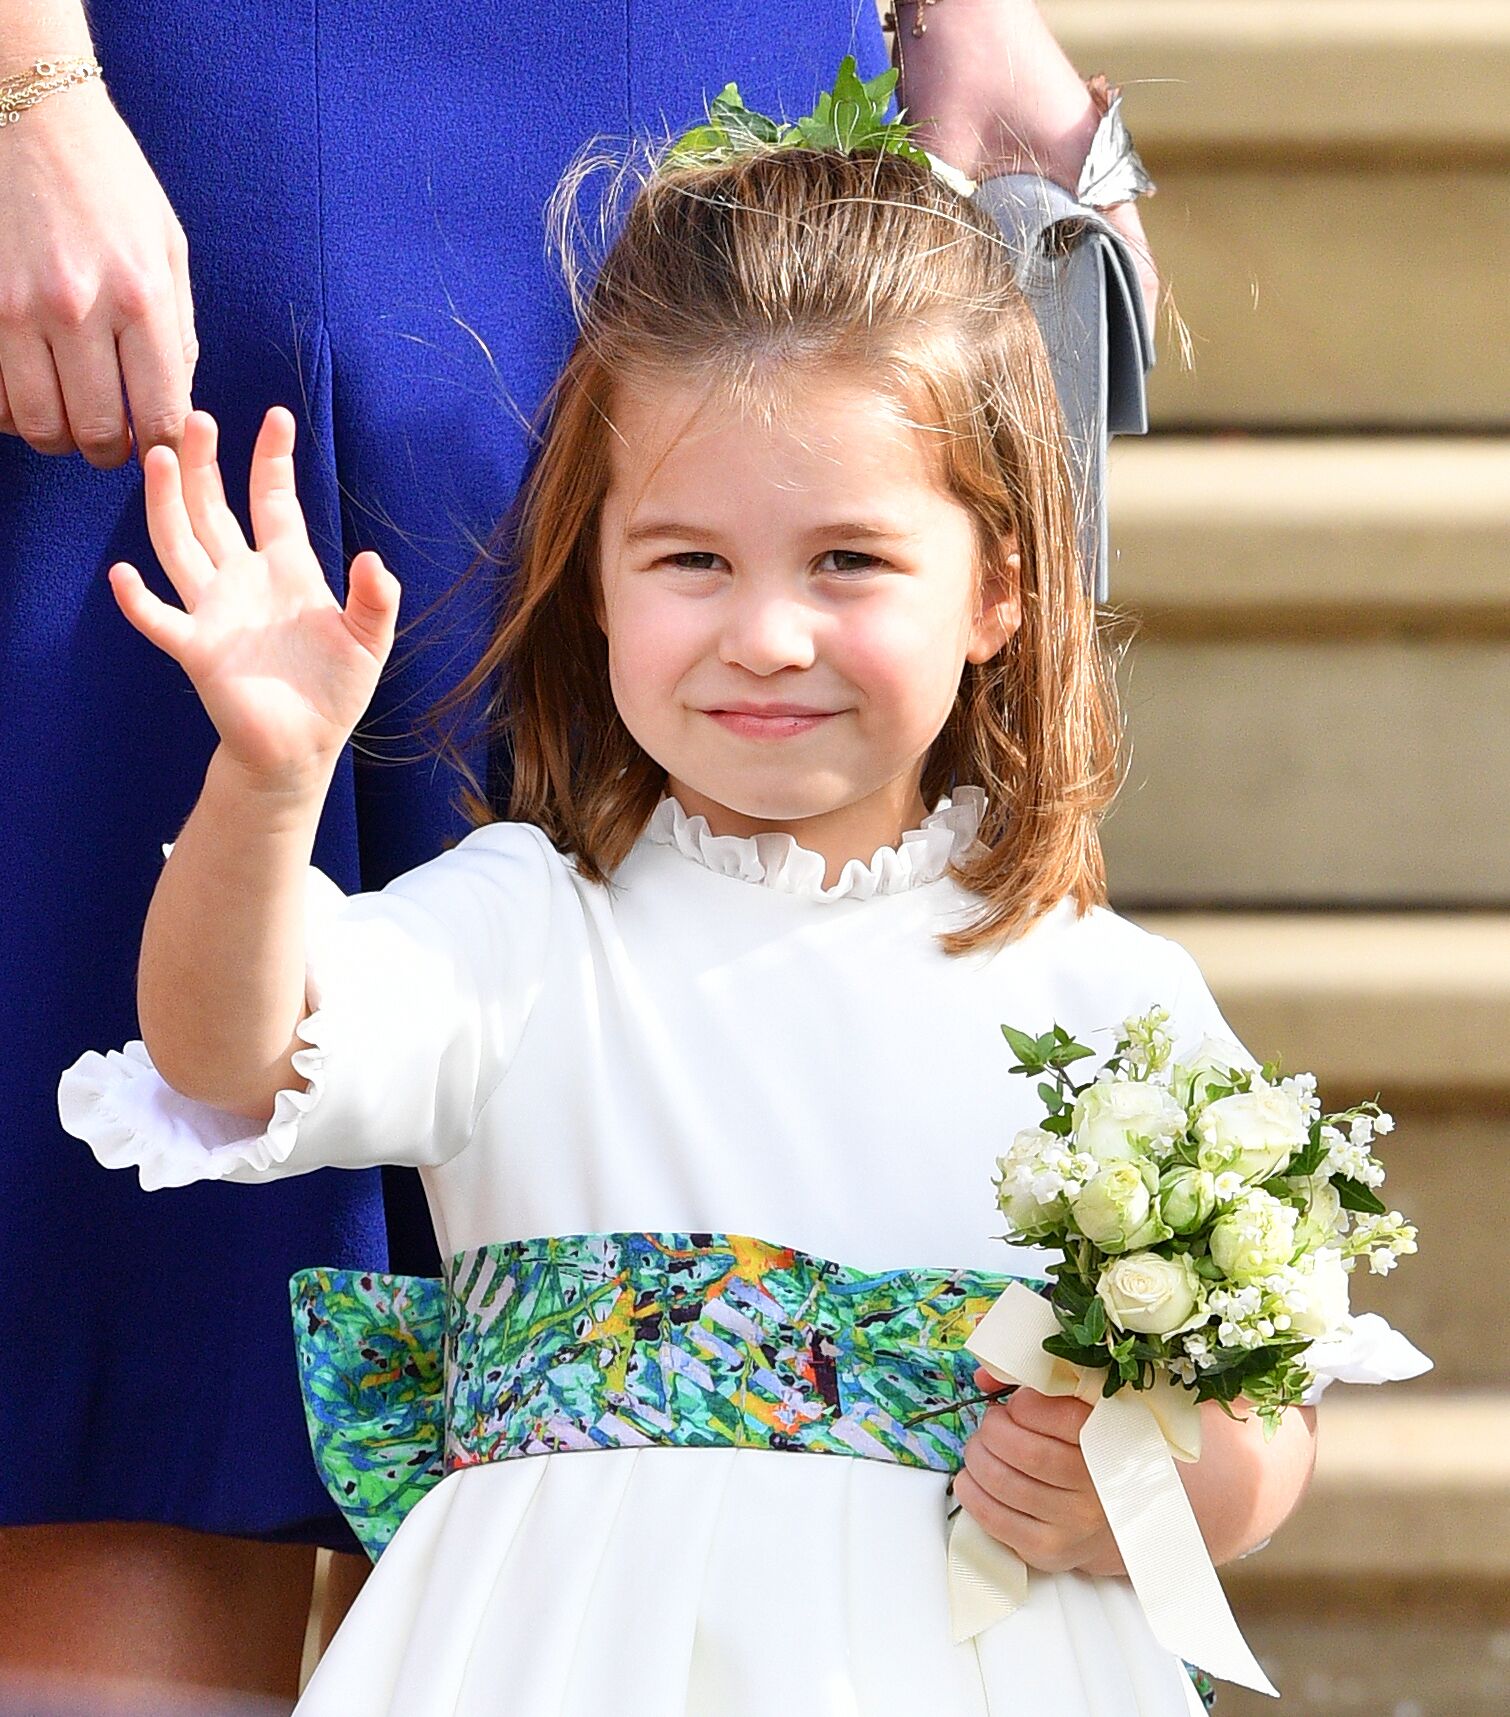 Her Royal Highness Princess Charlotte of Cambridge Princess Charlotte at the wedding of Princess Eugenie and Jack Brooksbank at St George's Chapel in Windsor, England | Photo: Getty Images